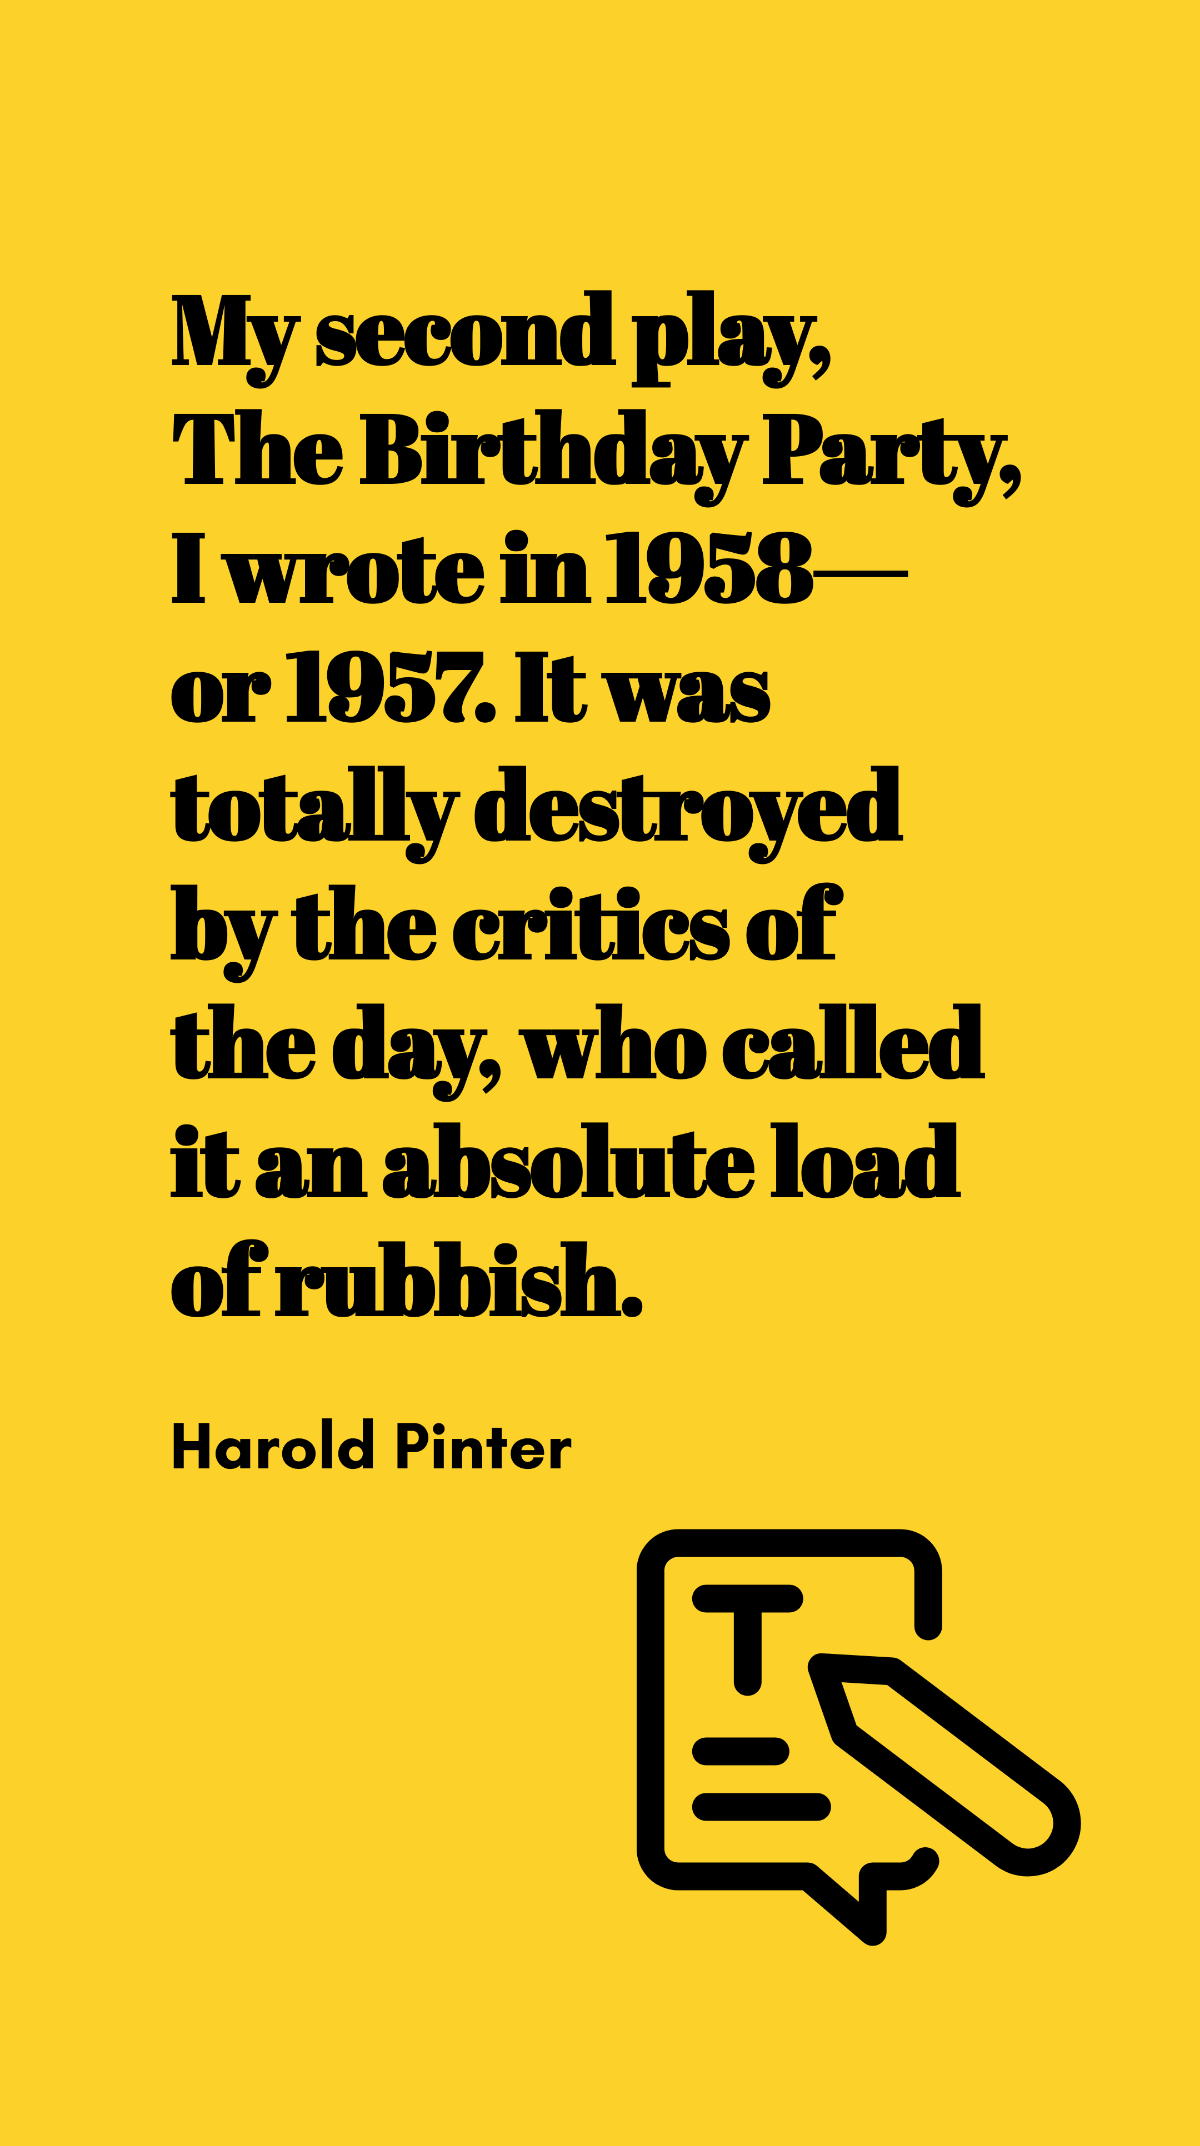 Harold Pinter - My second play, The Birthday Party, I wrote in 1958 - or 1957. It was totally destroyed by the critics of the day, who called it an absolute load of rubbish. Template